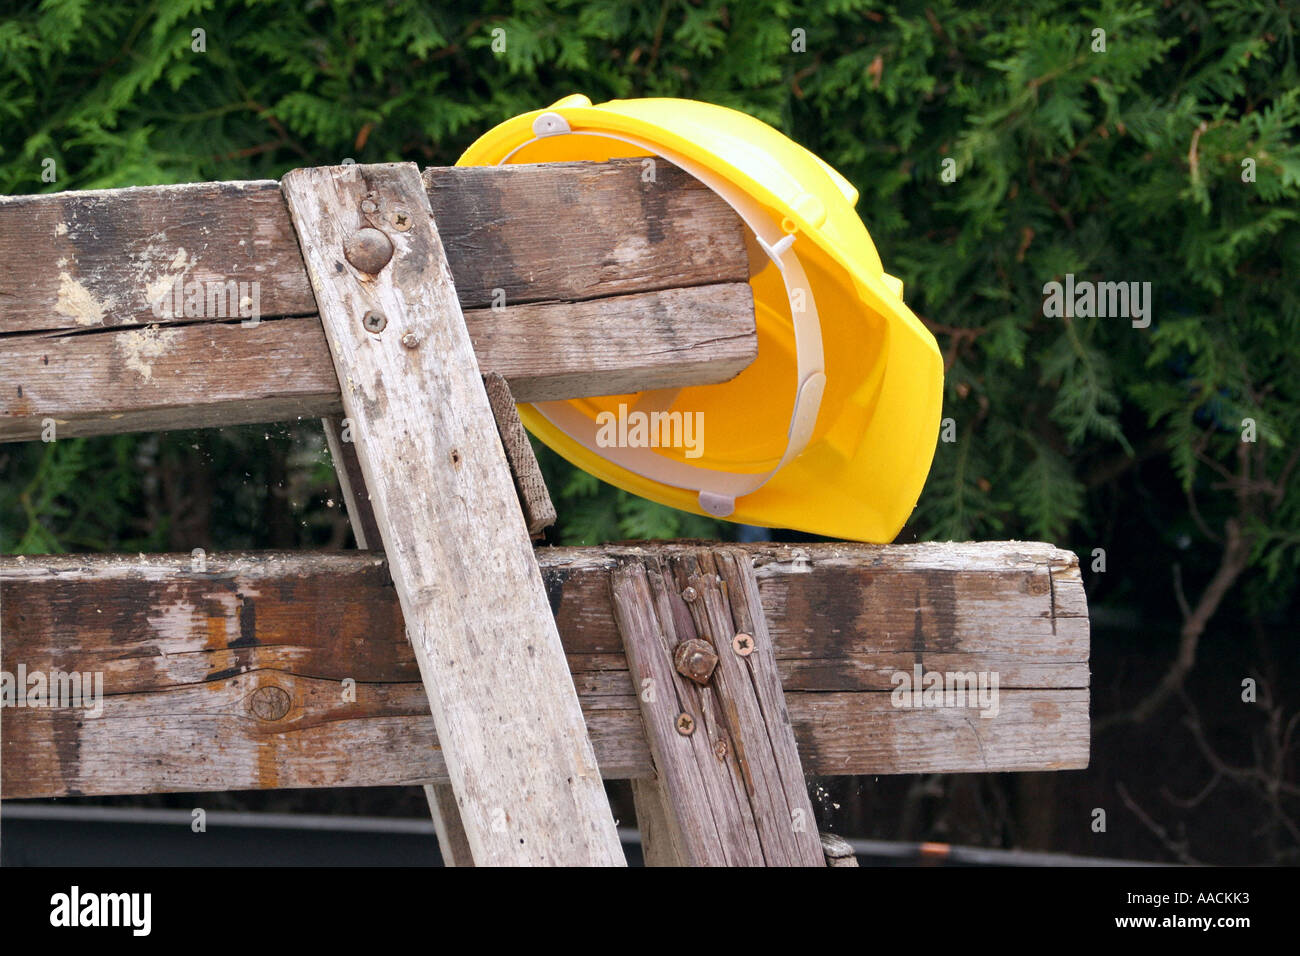 Helmet at a building site Stock Photo